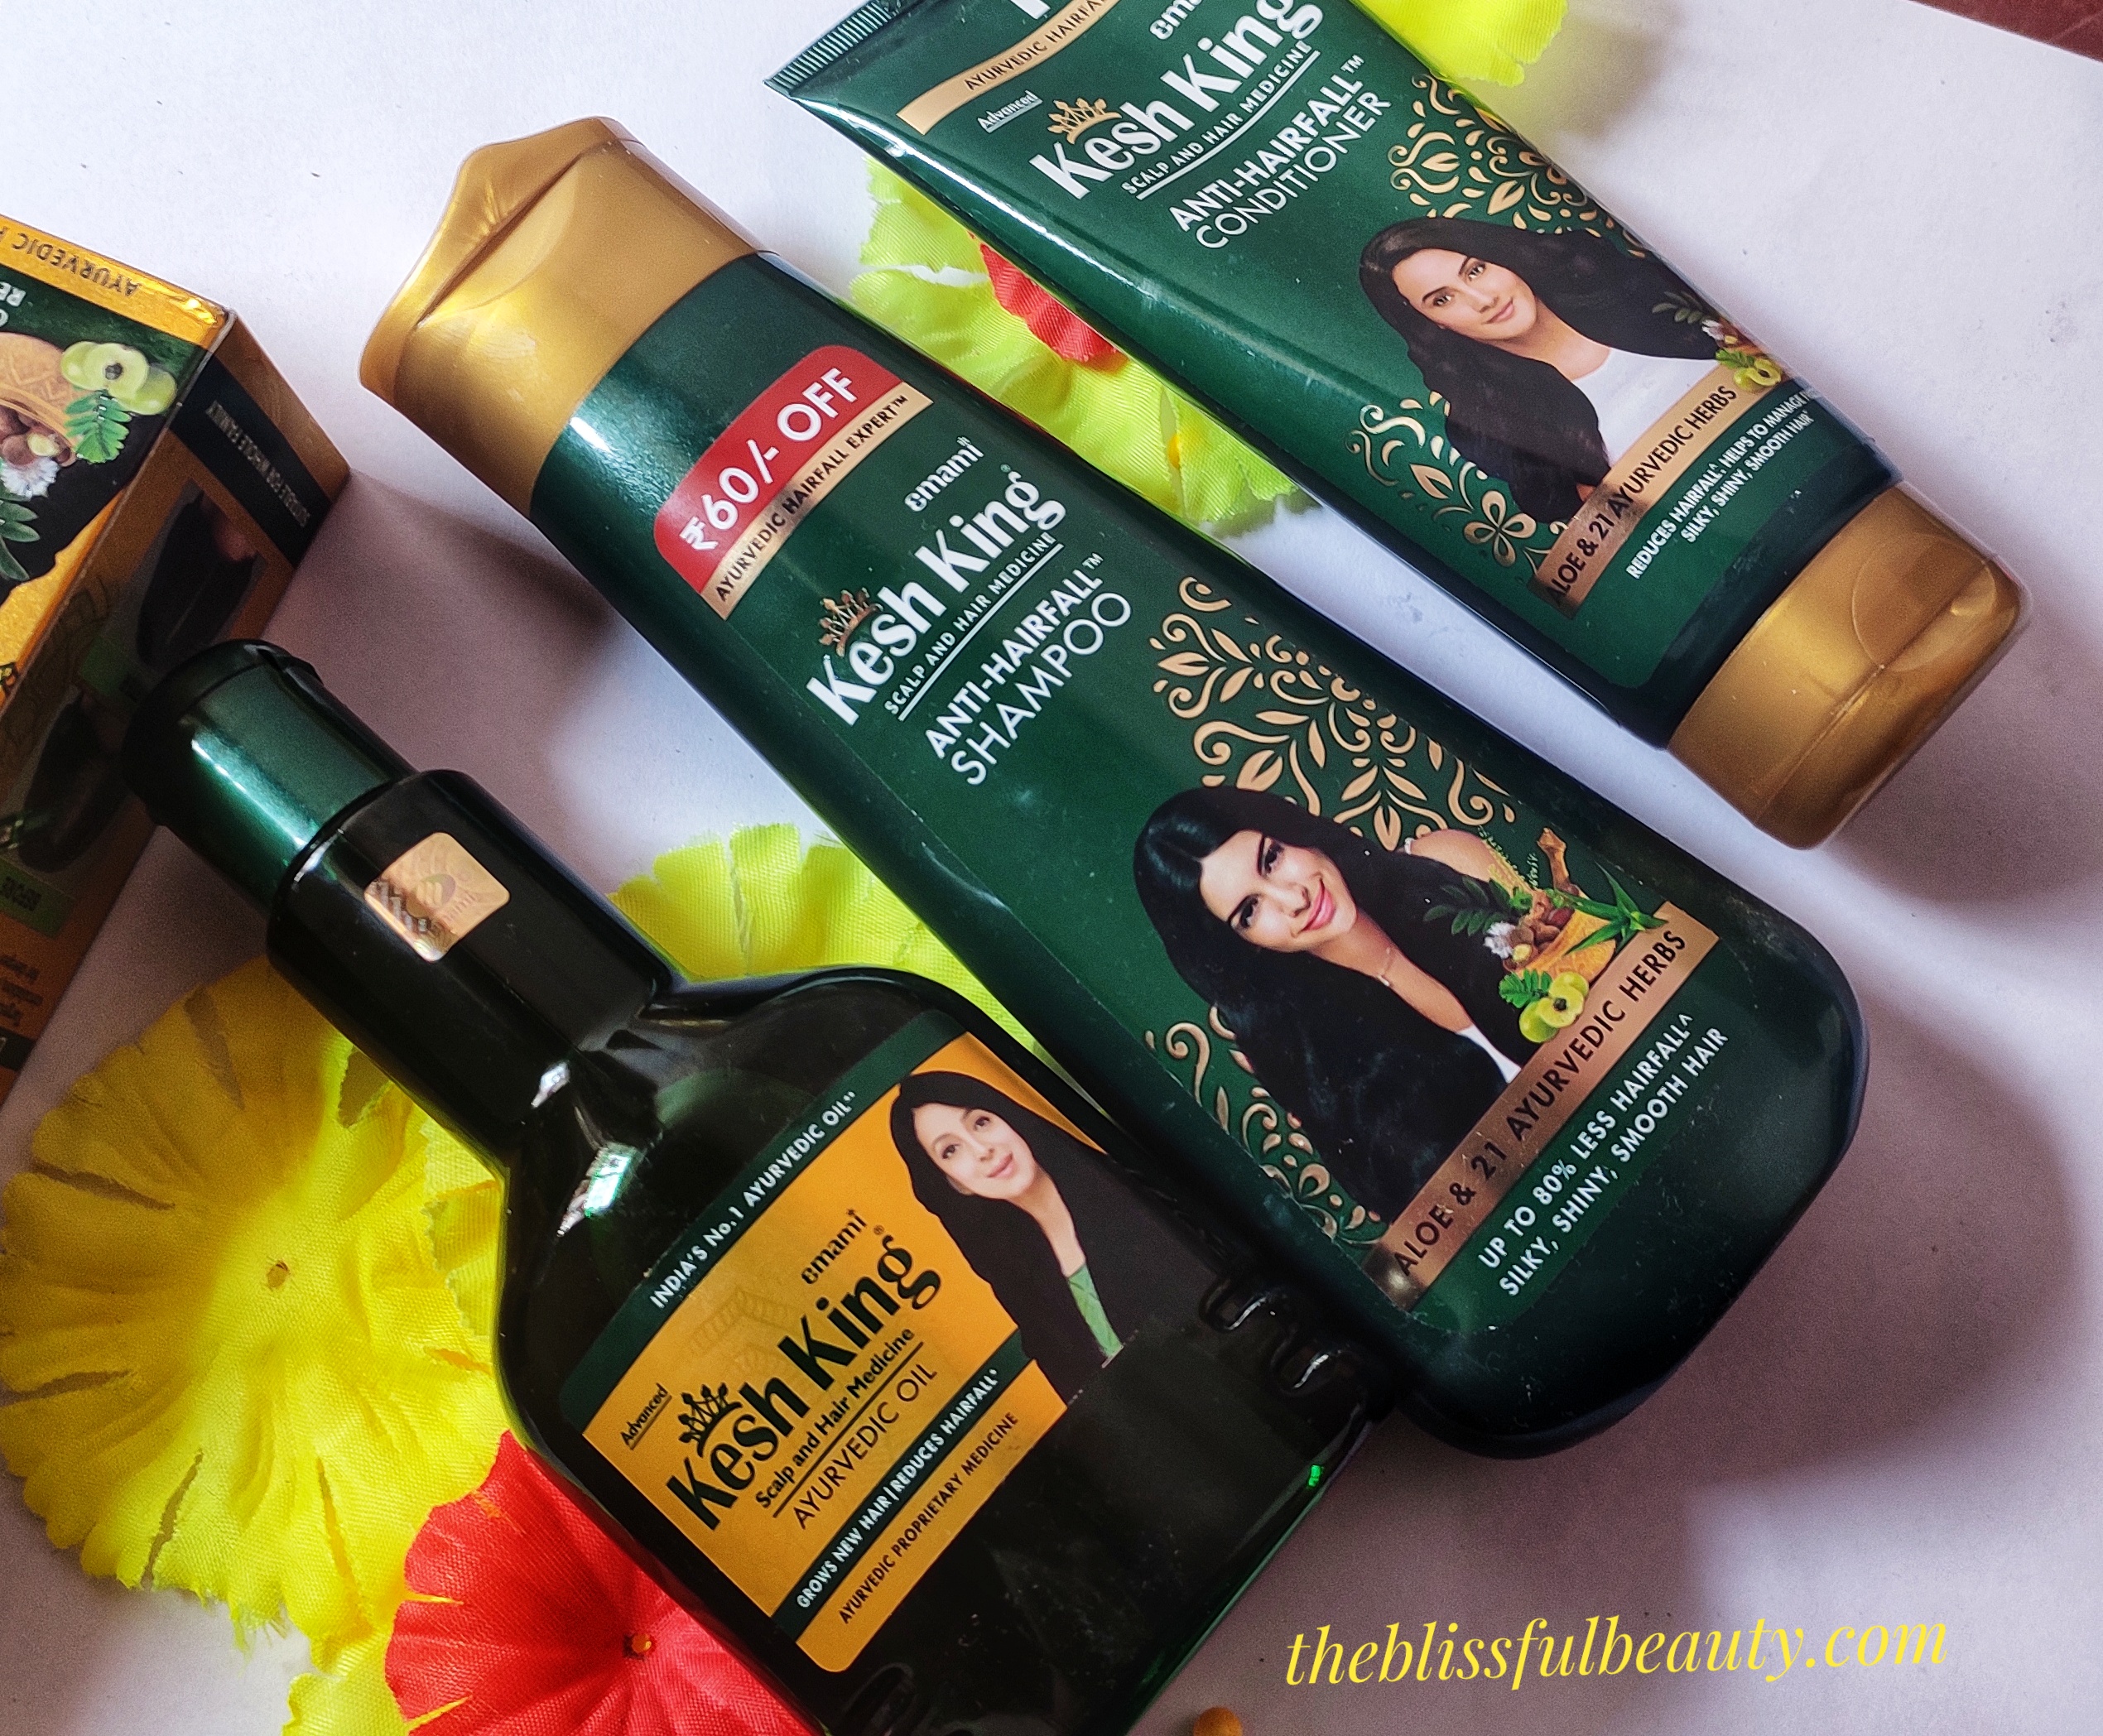 Kesh king Products Review:Hair oil|Shampoo|Conditioner